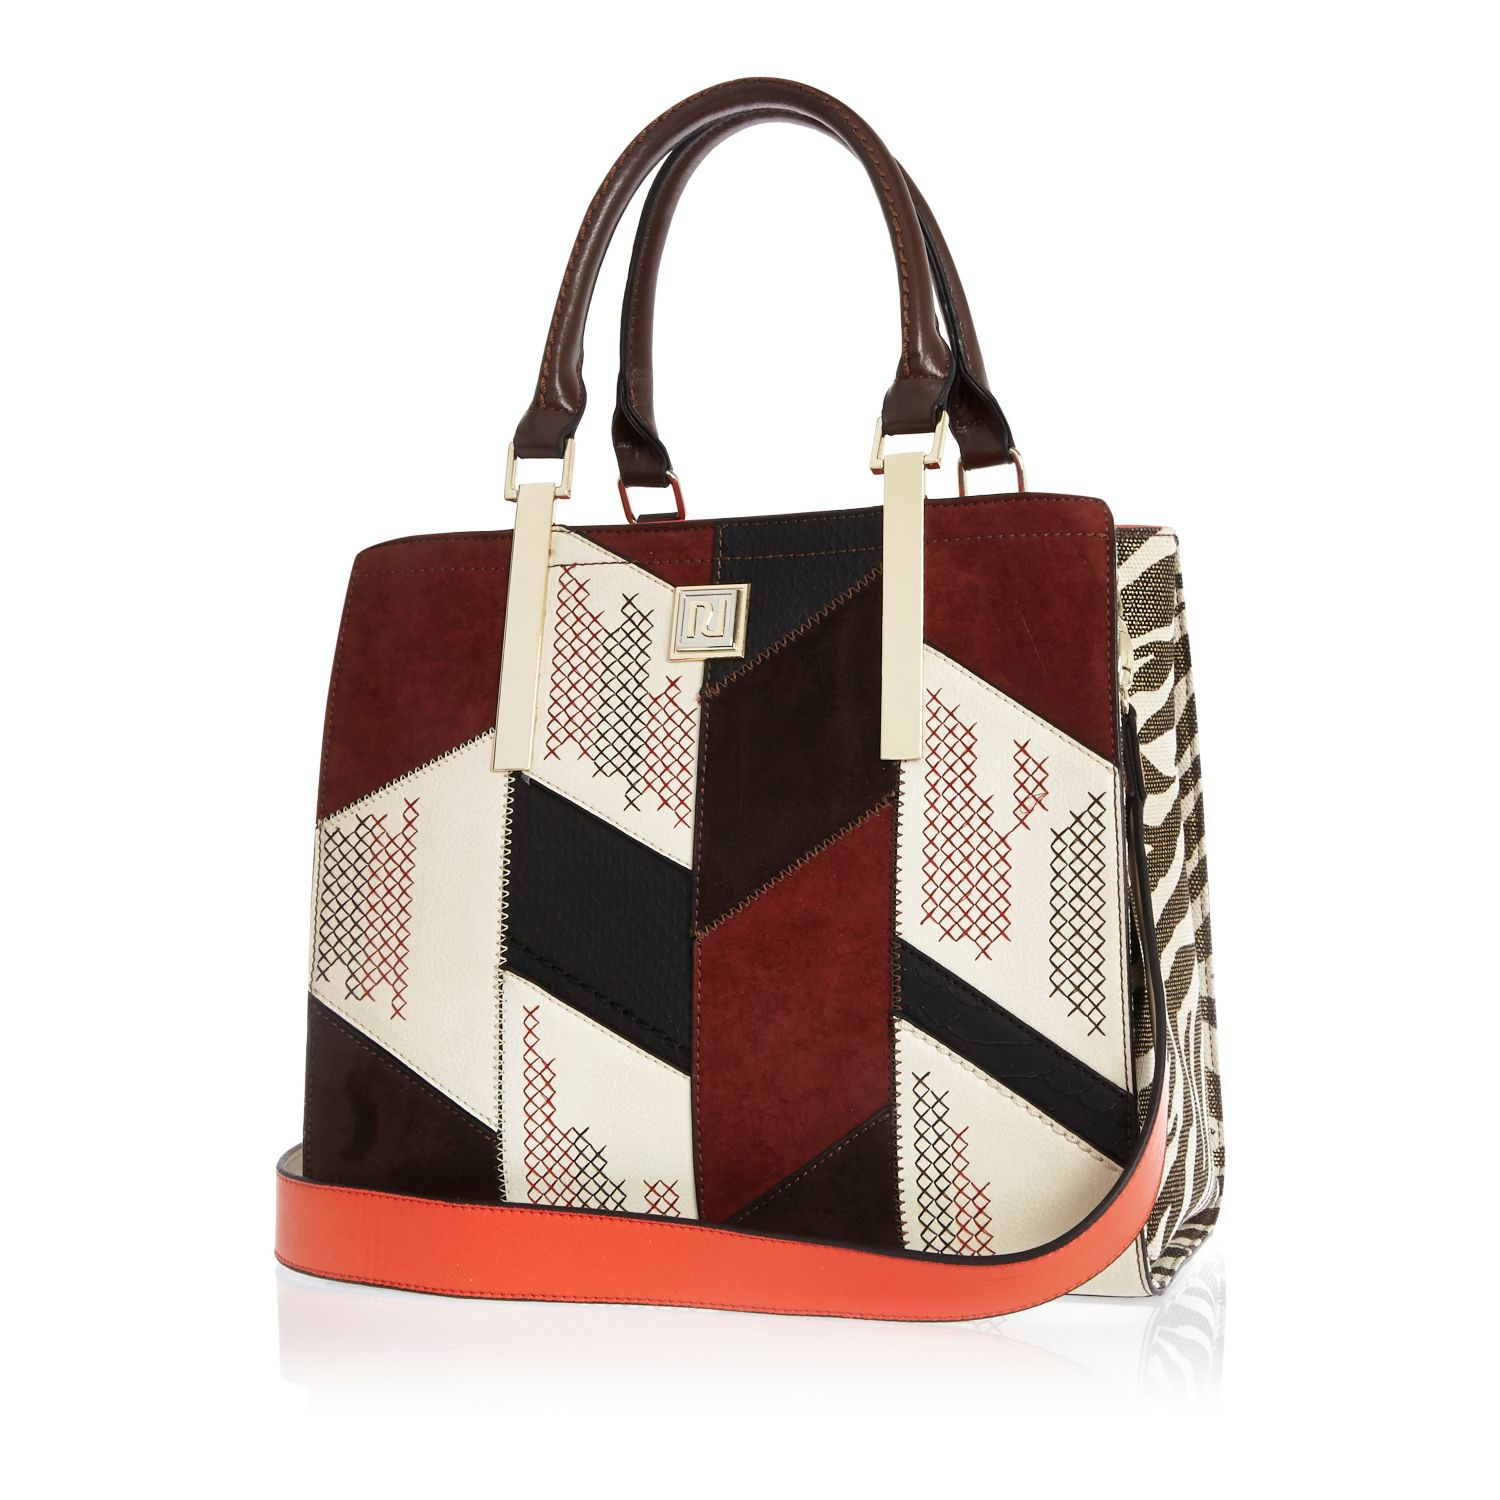 Lyst - River Island Red Patchwork Tote Handbag in Red